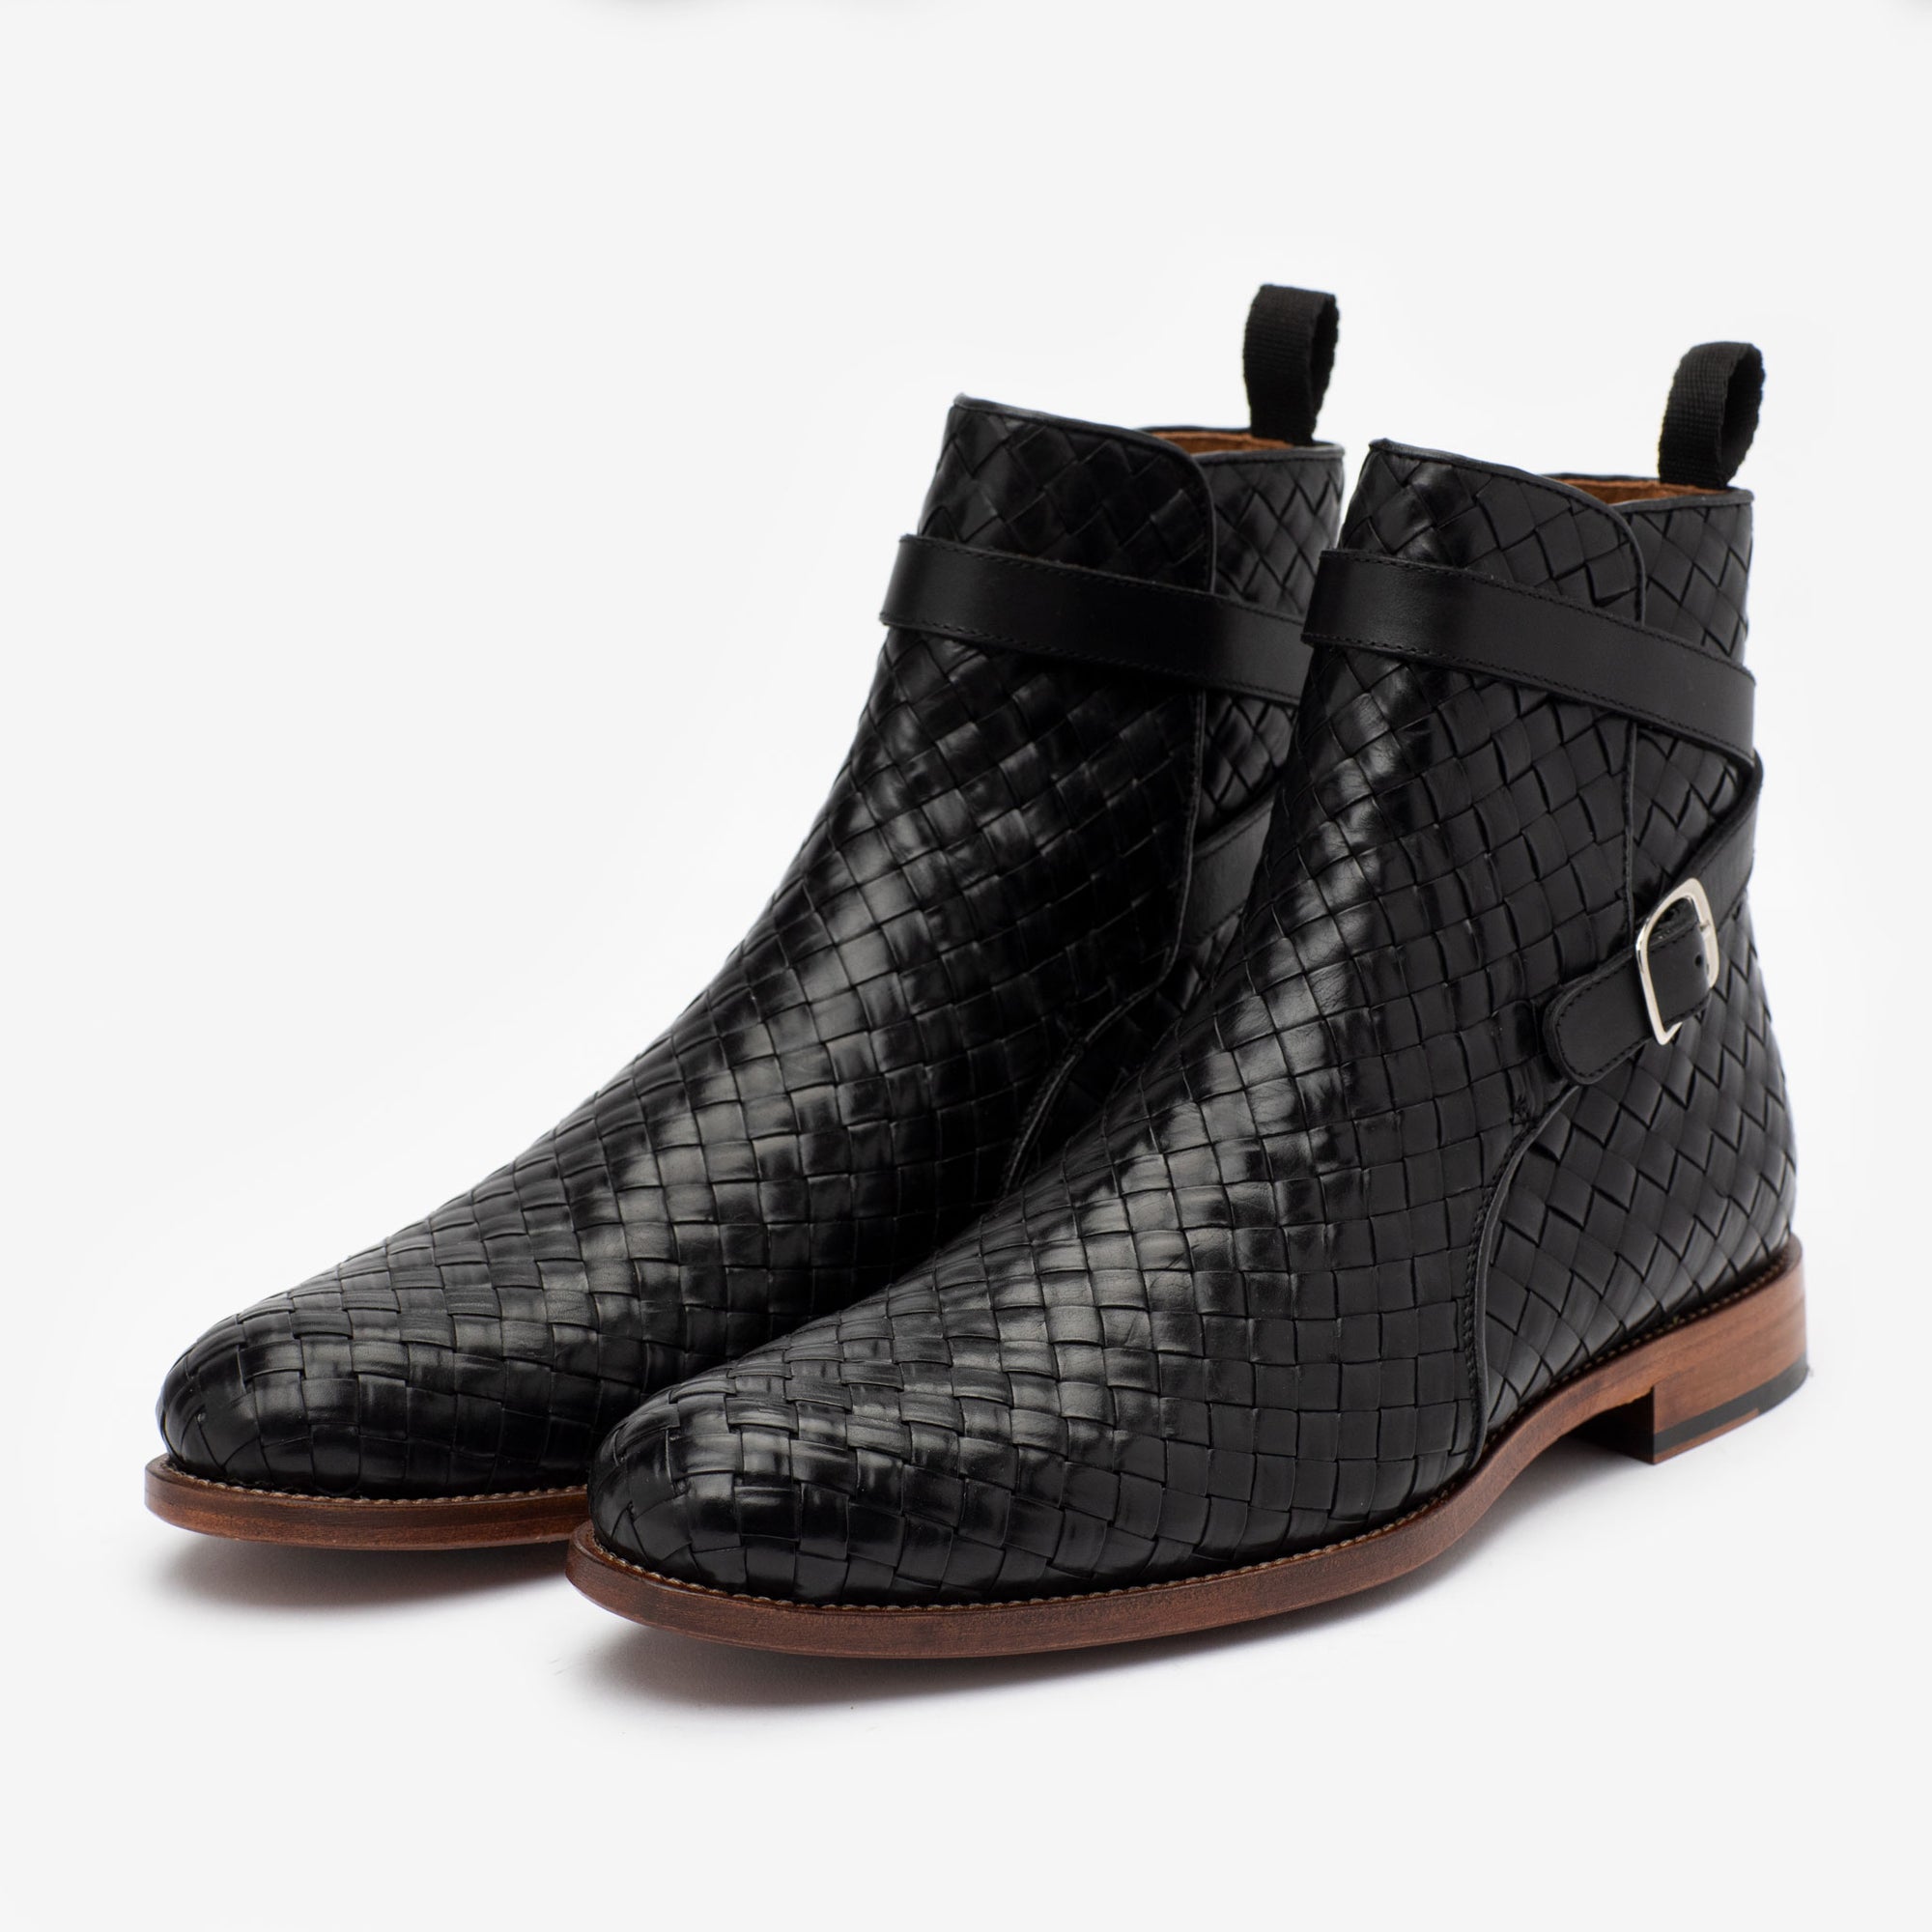 The Dylan Boot in Black Woven {{rollover}}